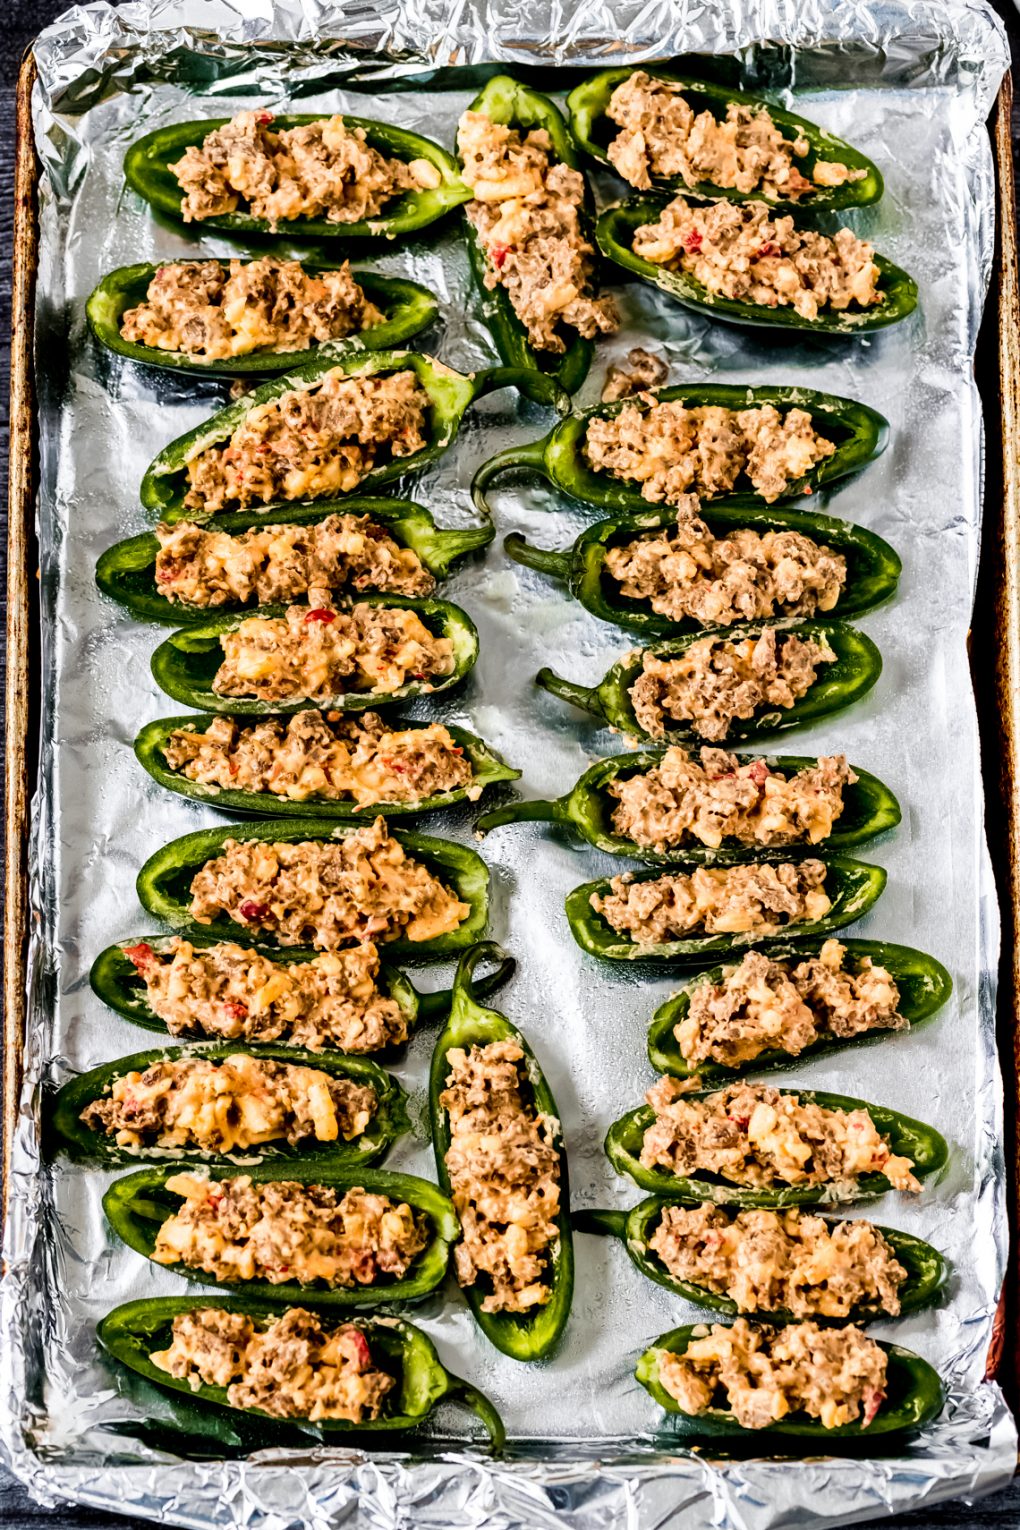 uncooked stuffed jalapeño peppers on a foil-lined baking sheet